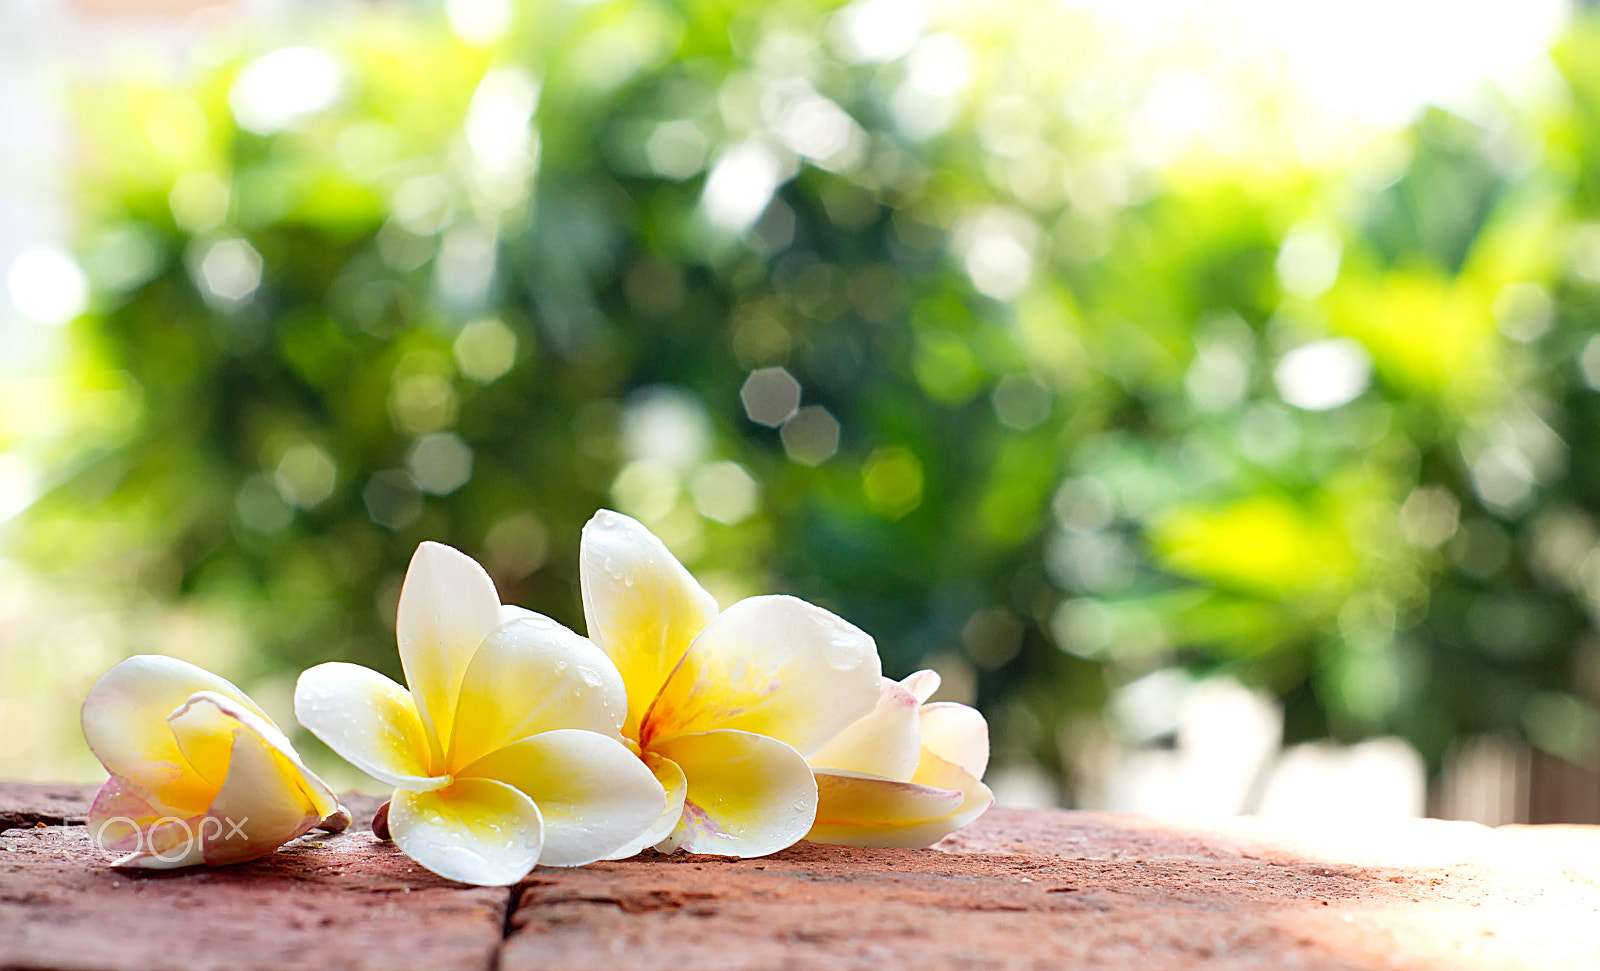 Sony Alpha DSLR-A500 + Minolta AF 50mm F1.7 sample photo. Blooming white plumeria or frangipani flowers on the brick floor photography